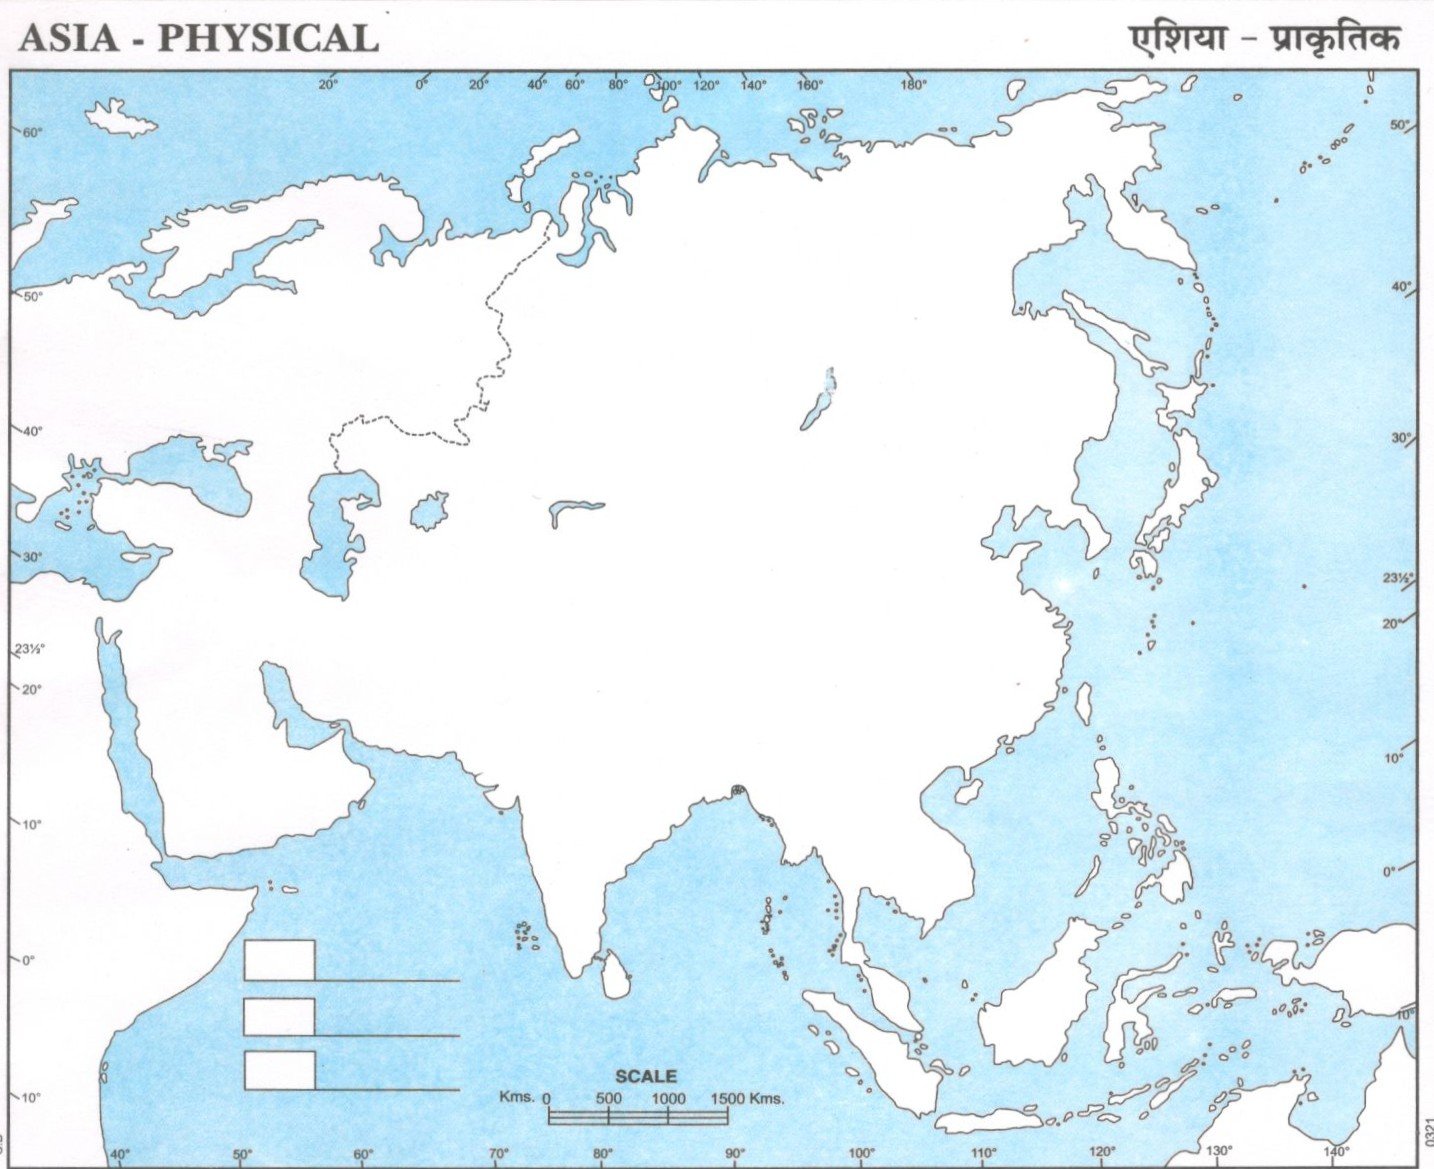 Physical Map Of Asia For Students Physical Map Of Asia For School (Blank) - Pdf Download